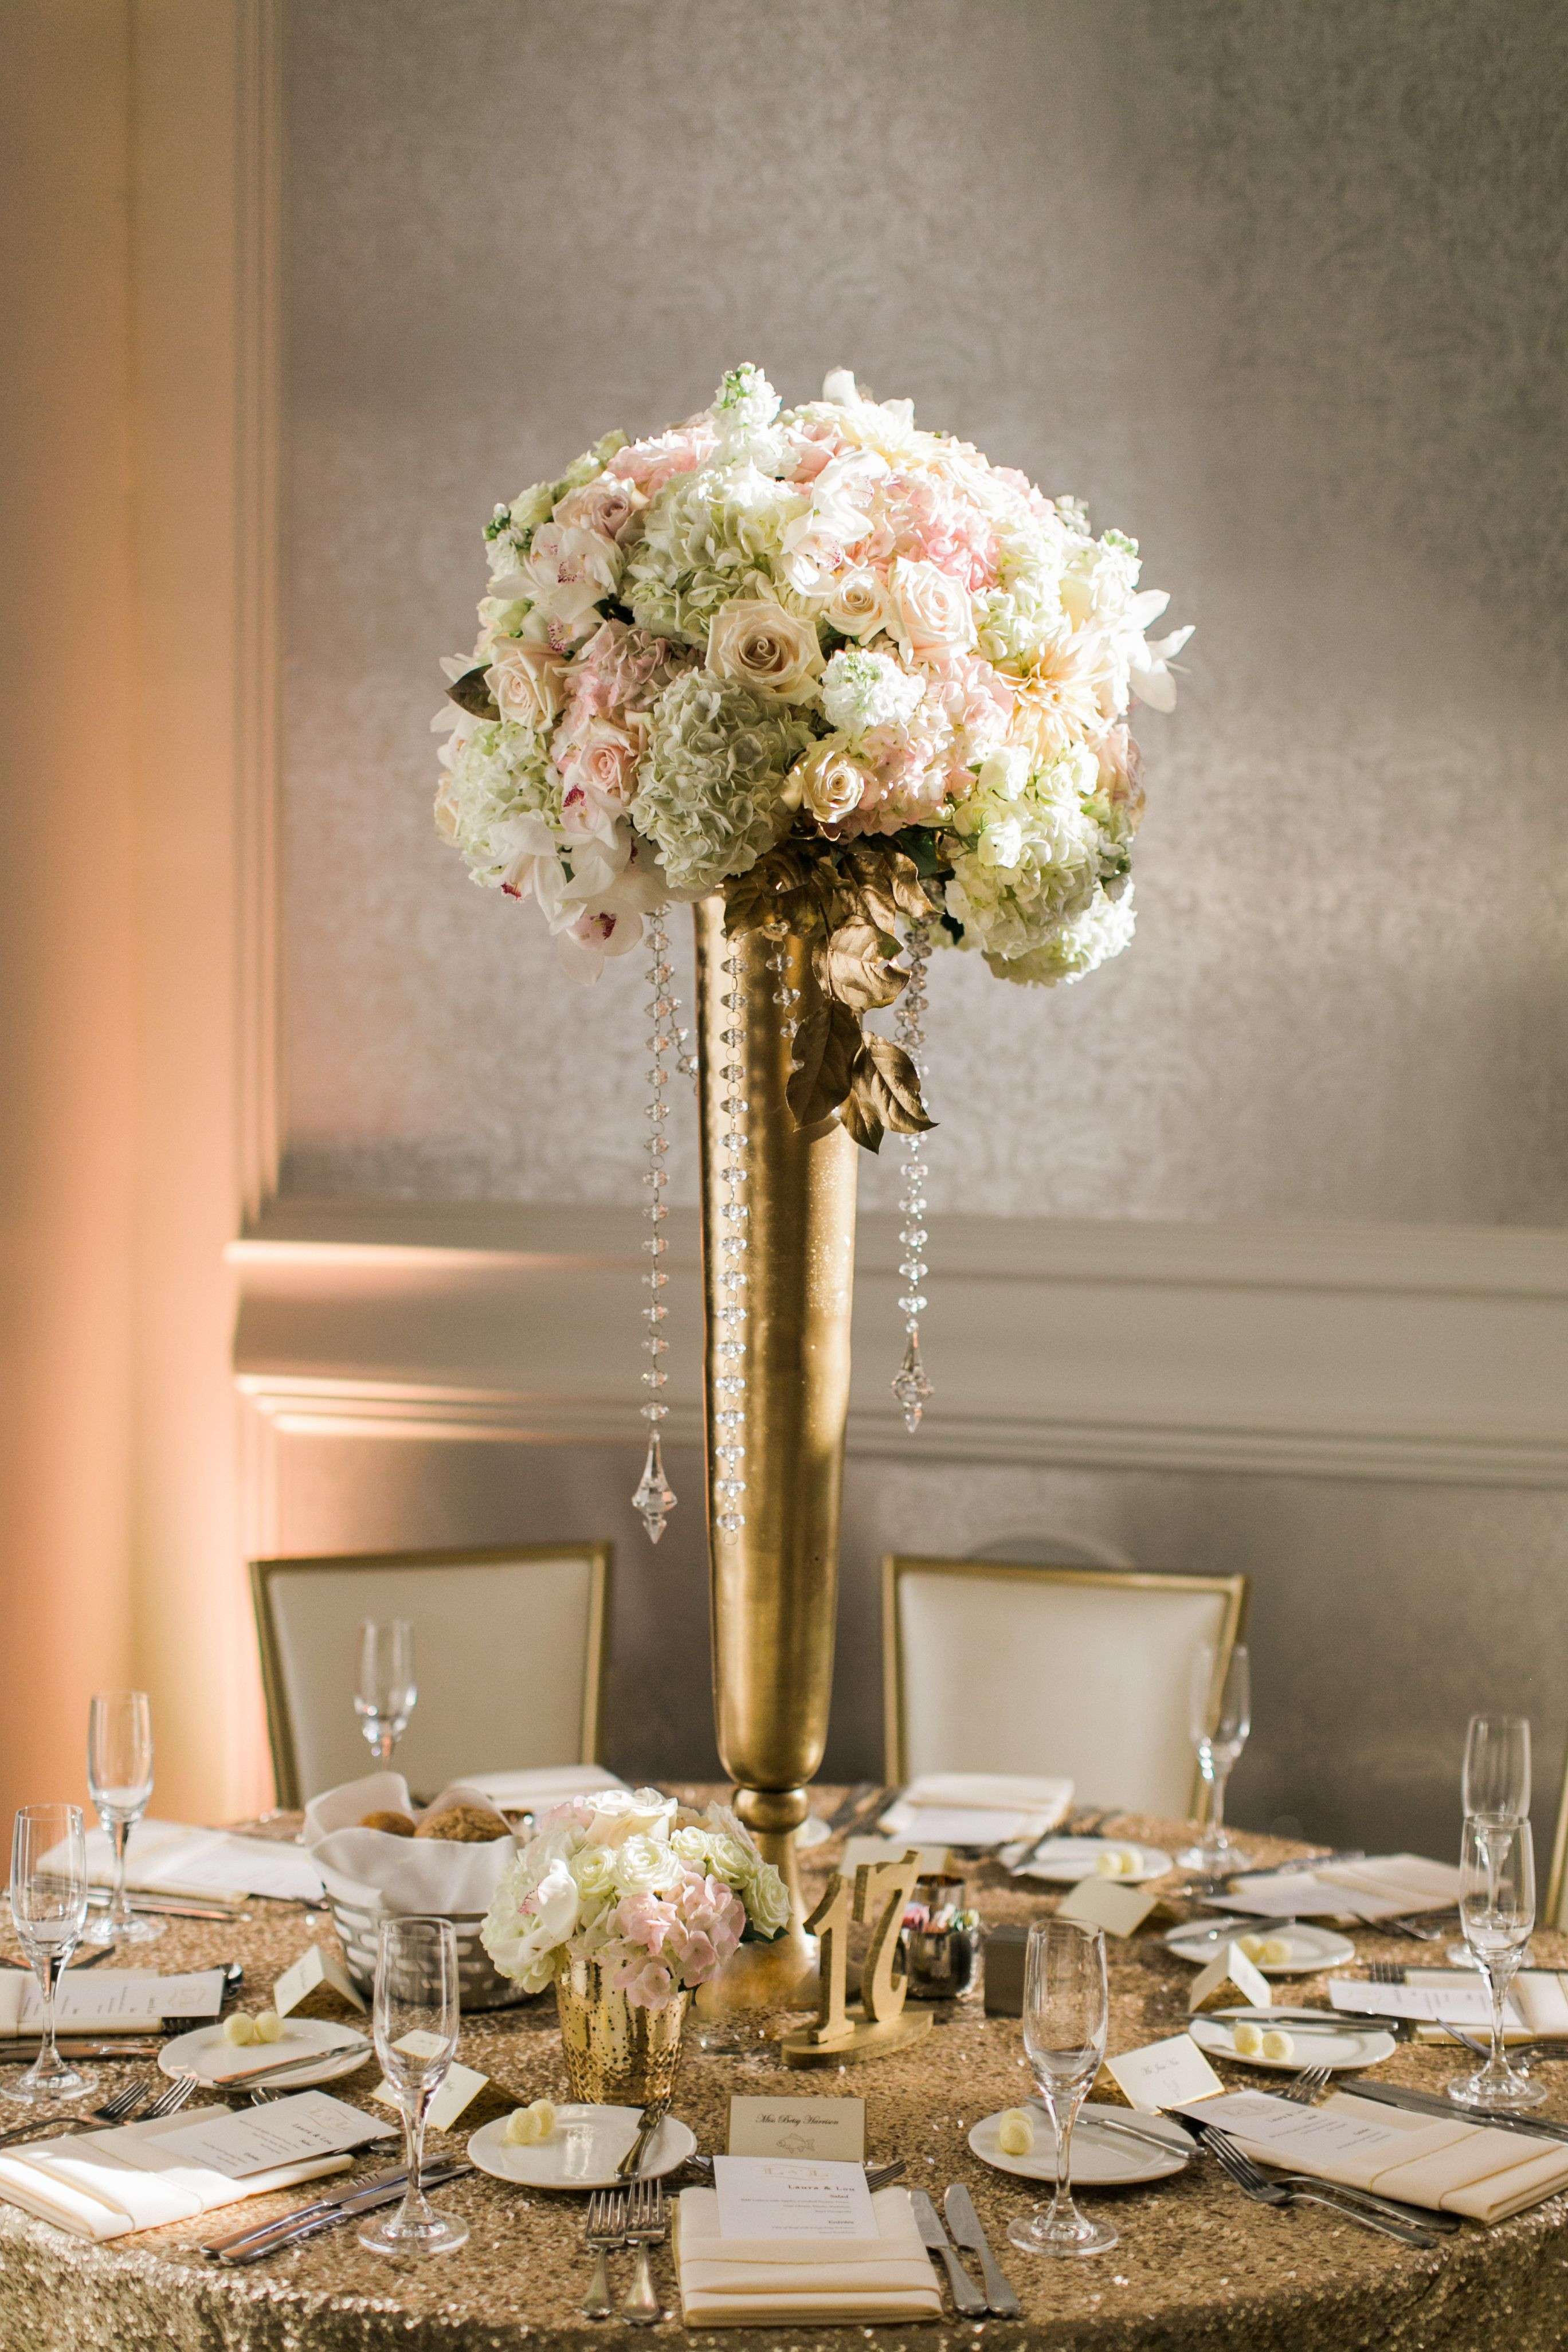 Tall Clear Glass Vases for Weddings Of Sweet Looking Tall Vase Centerpiece Party Decorations Surprising with Extraordinary Tall Vase Centerpiece Gold Bridal Ideas Pinterest Scheme Of Arrangements Centerpieces Diy